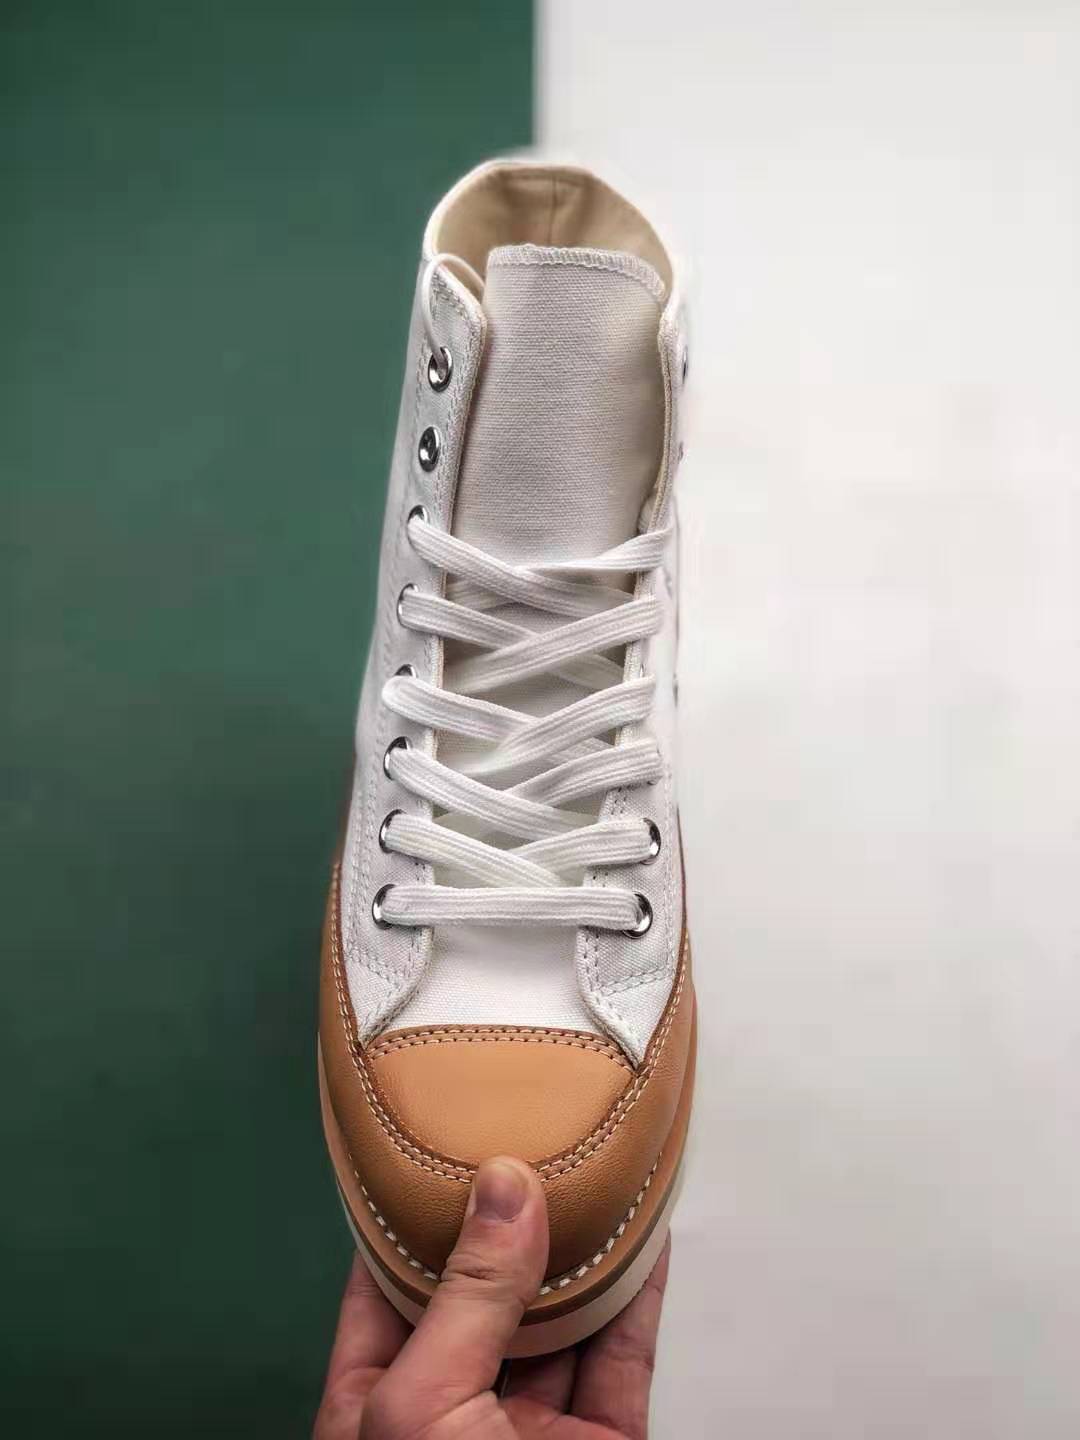 Converse Chuck 70 Hi 'Ivory' 162056C - Classic Style with a Modern Twist